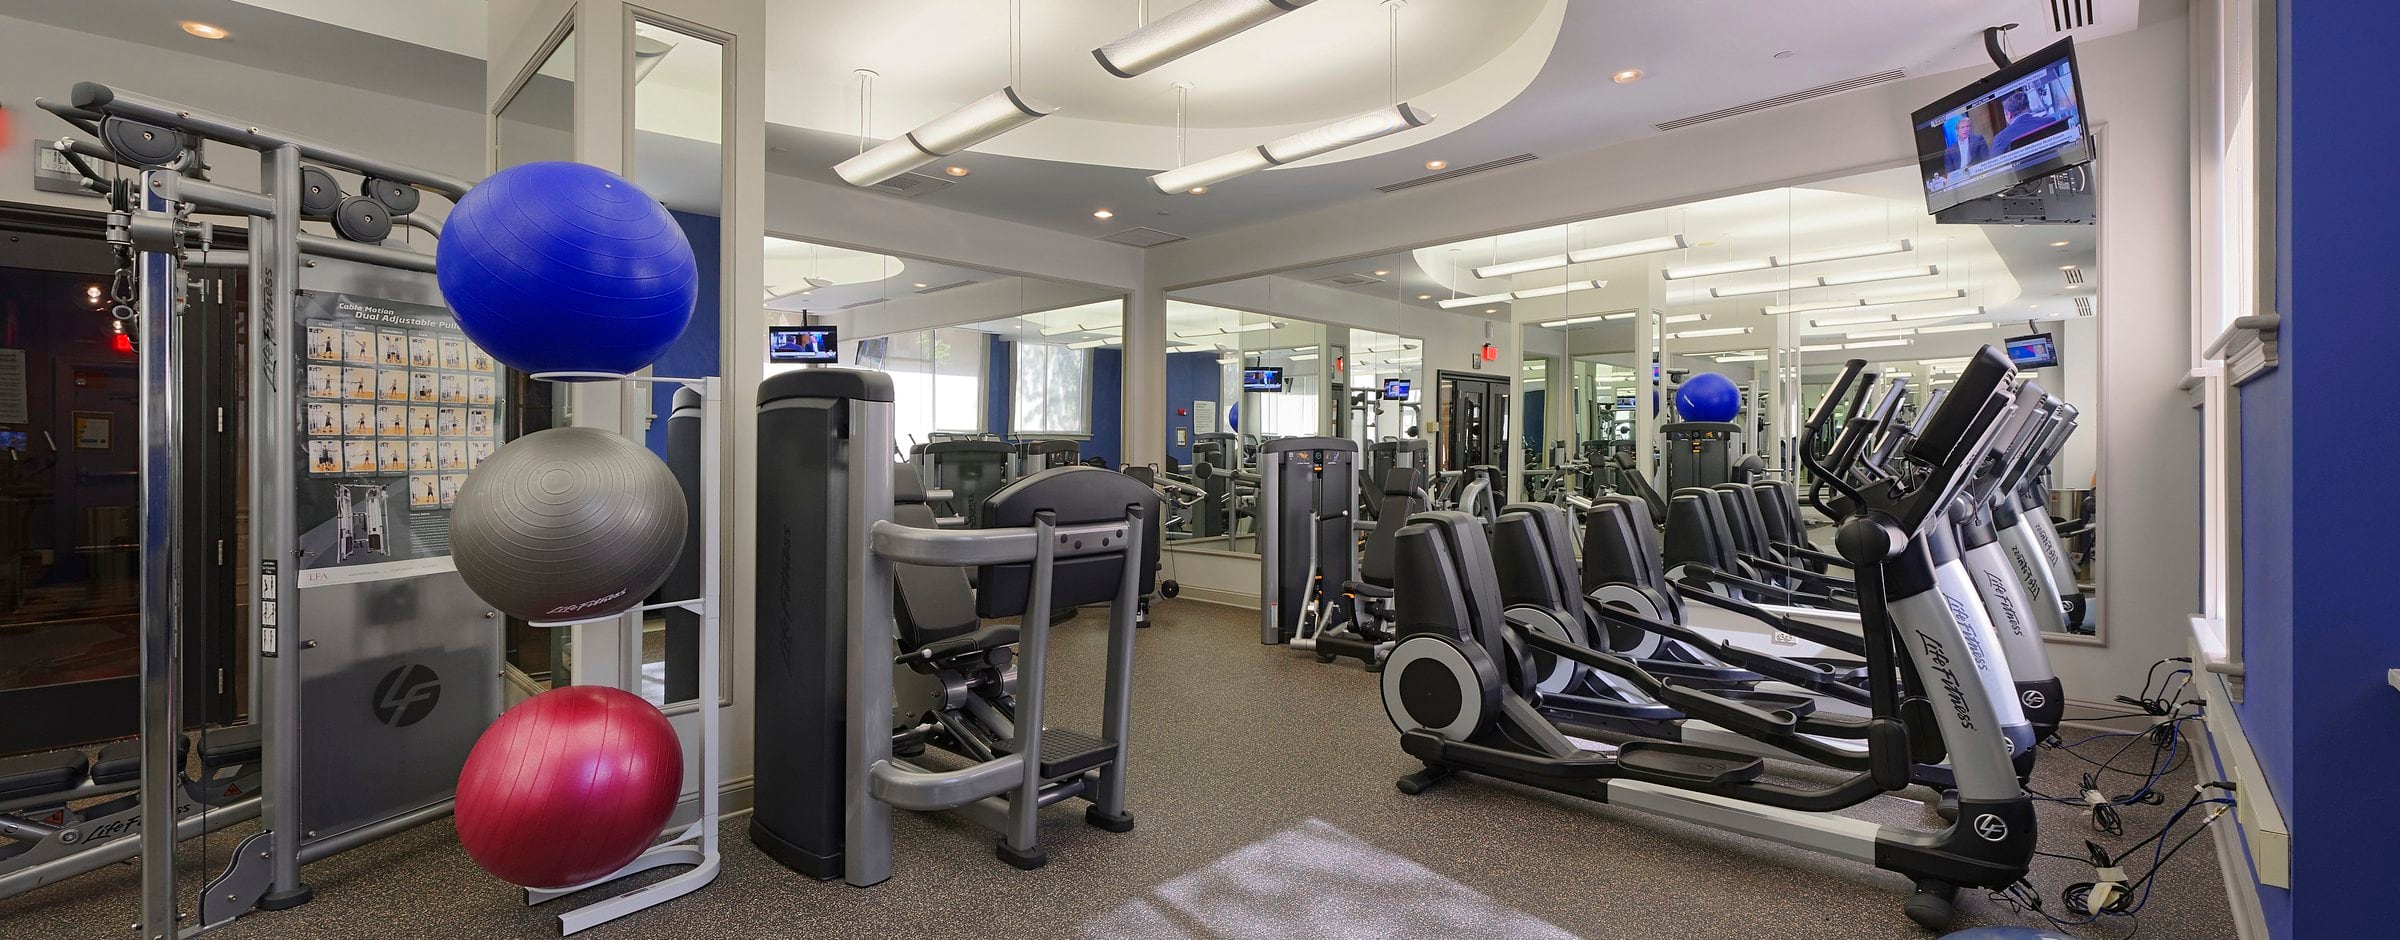 Avalon at Gallery Place Fitness Center